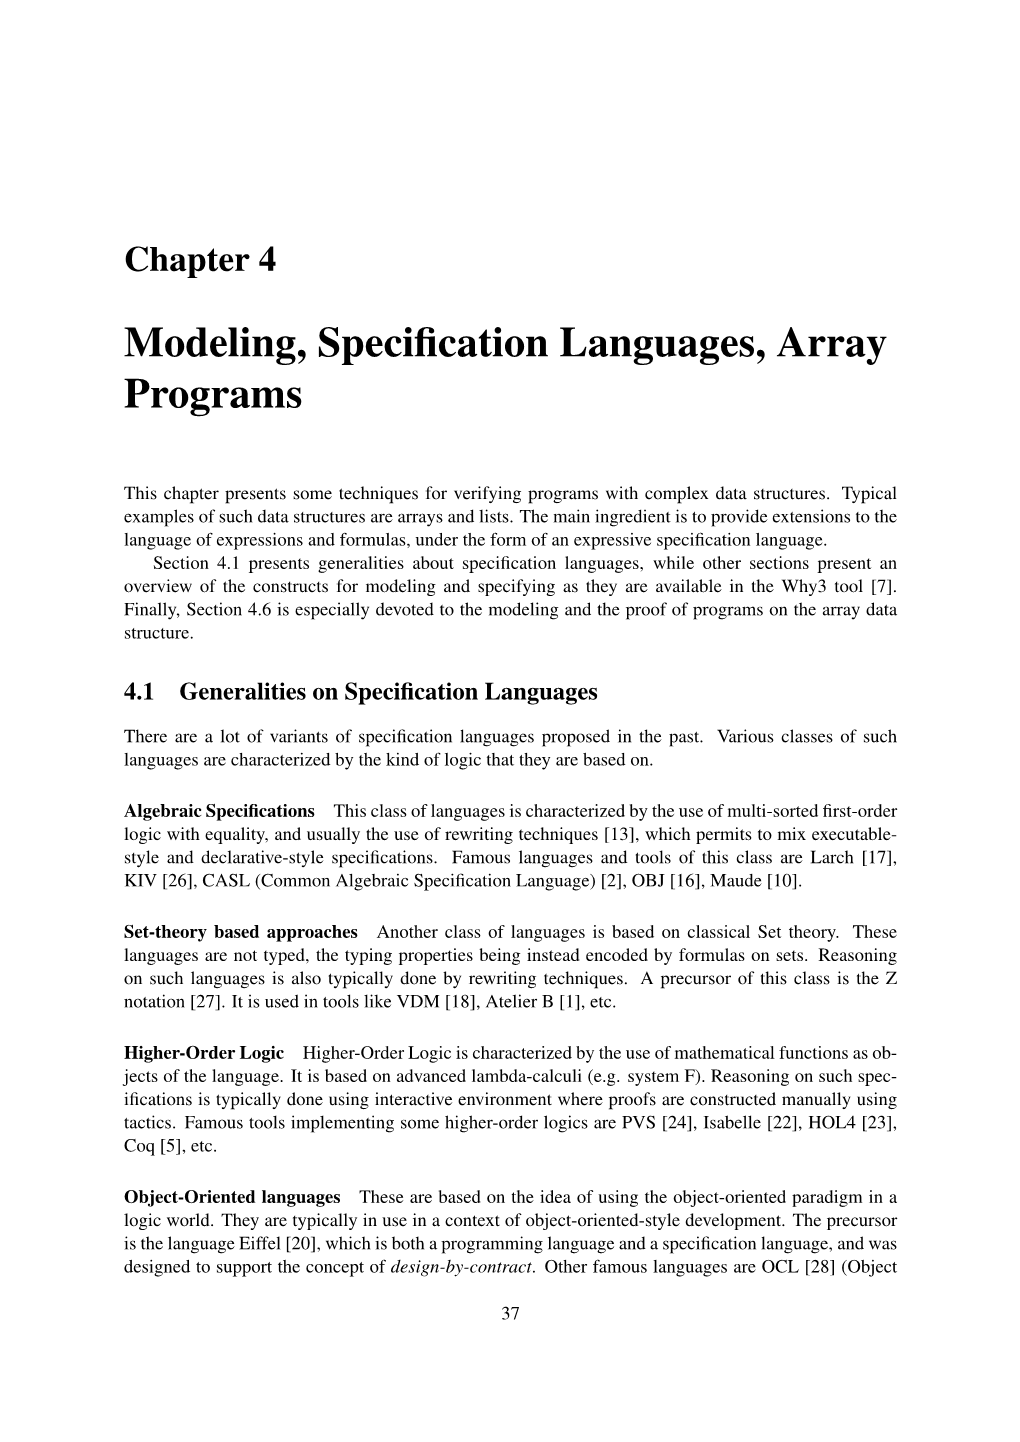 Modeling, Specification Languages, Array Programs